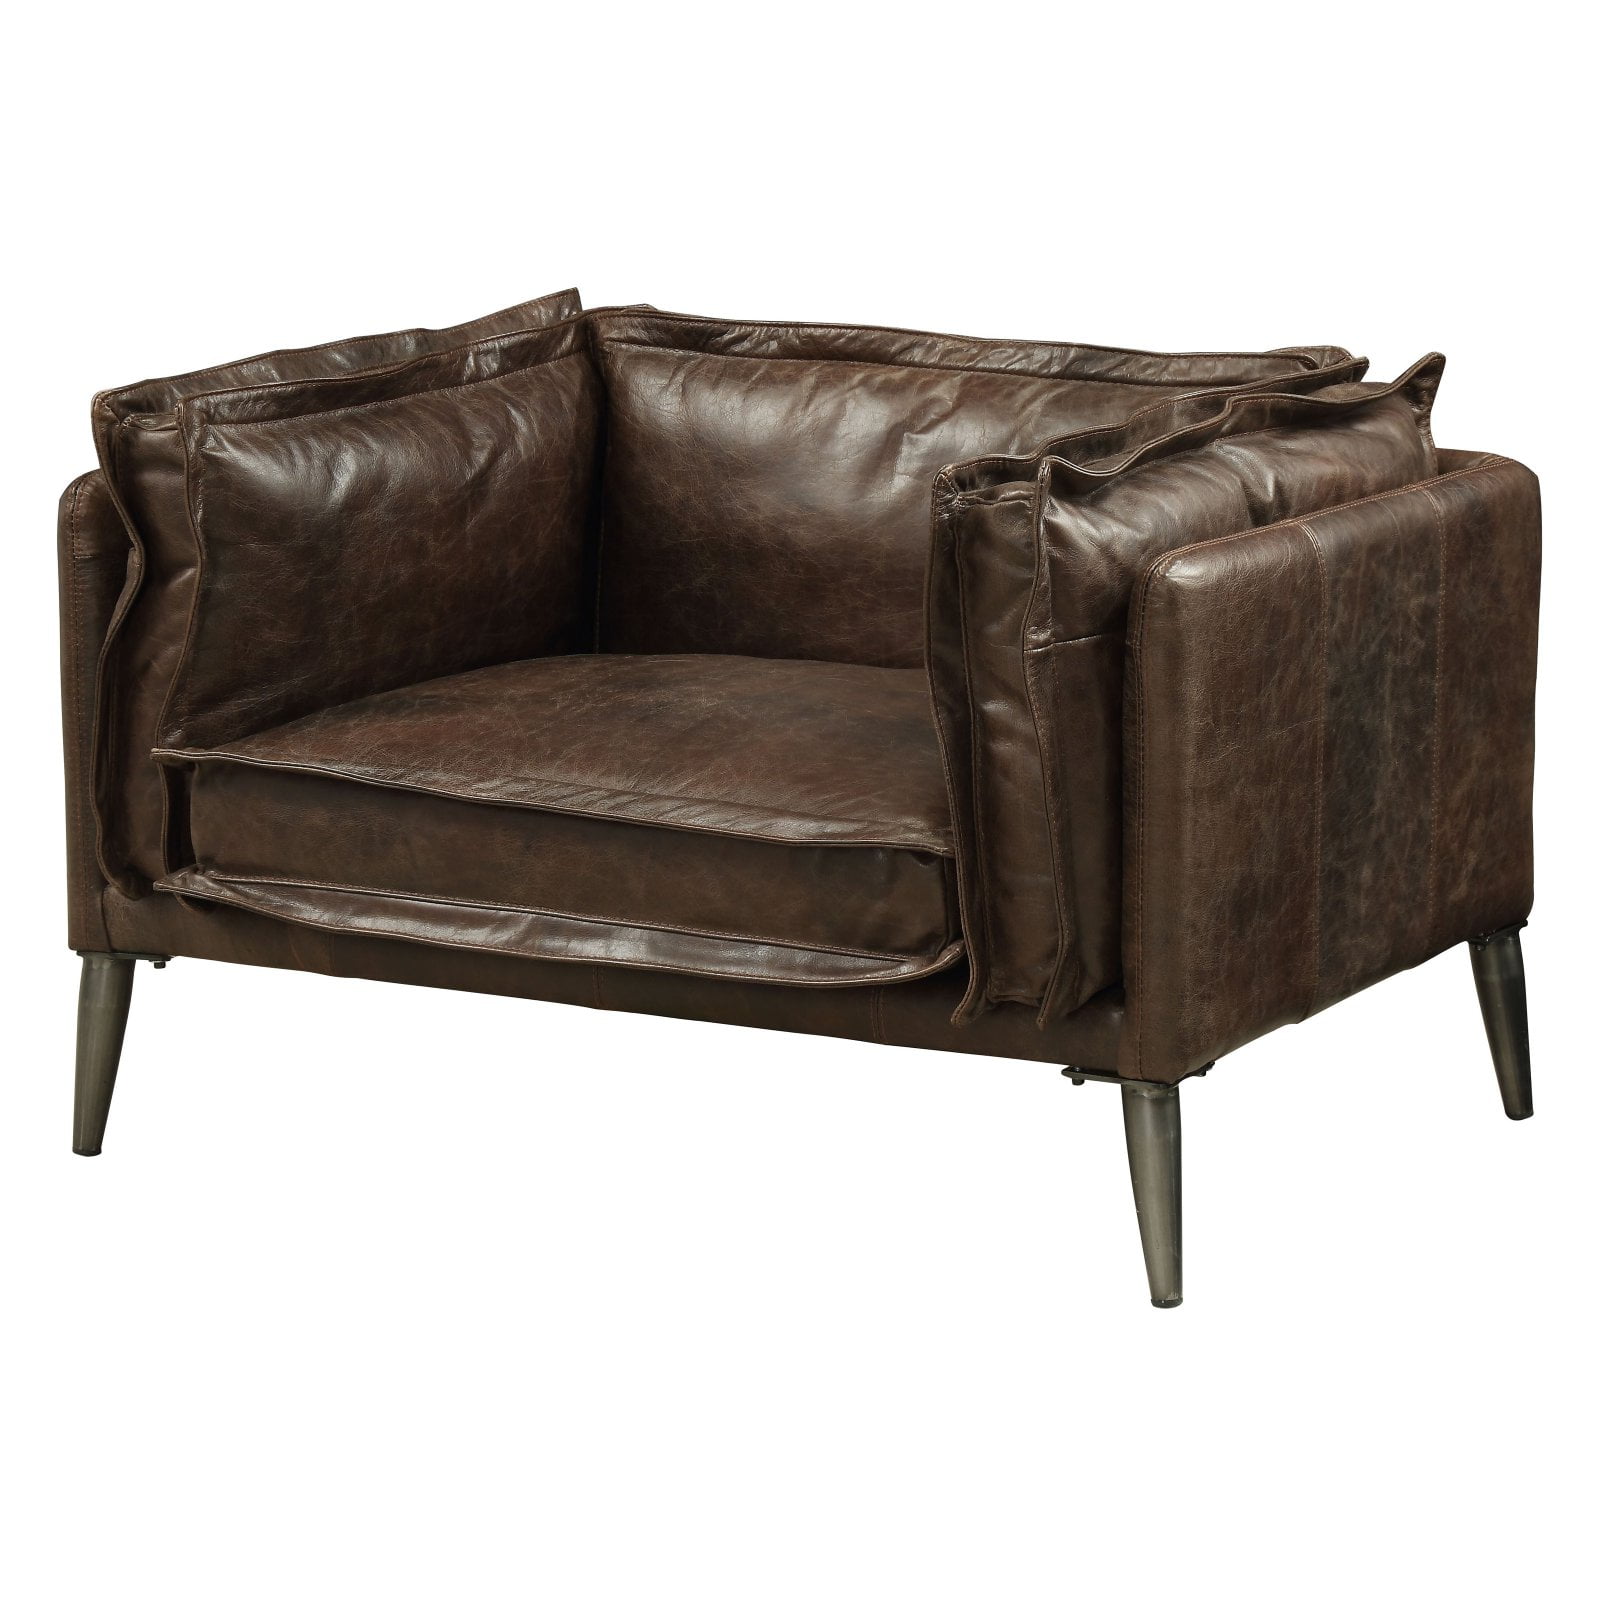 Picture of ACME 52482 Porchester Chair - Distress Chocolate Top Grain Leather - 30 x 47 x 34 in.